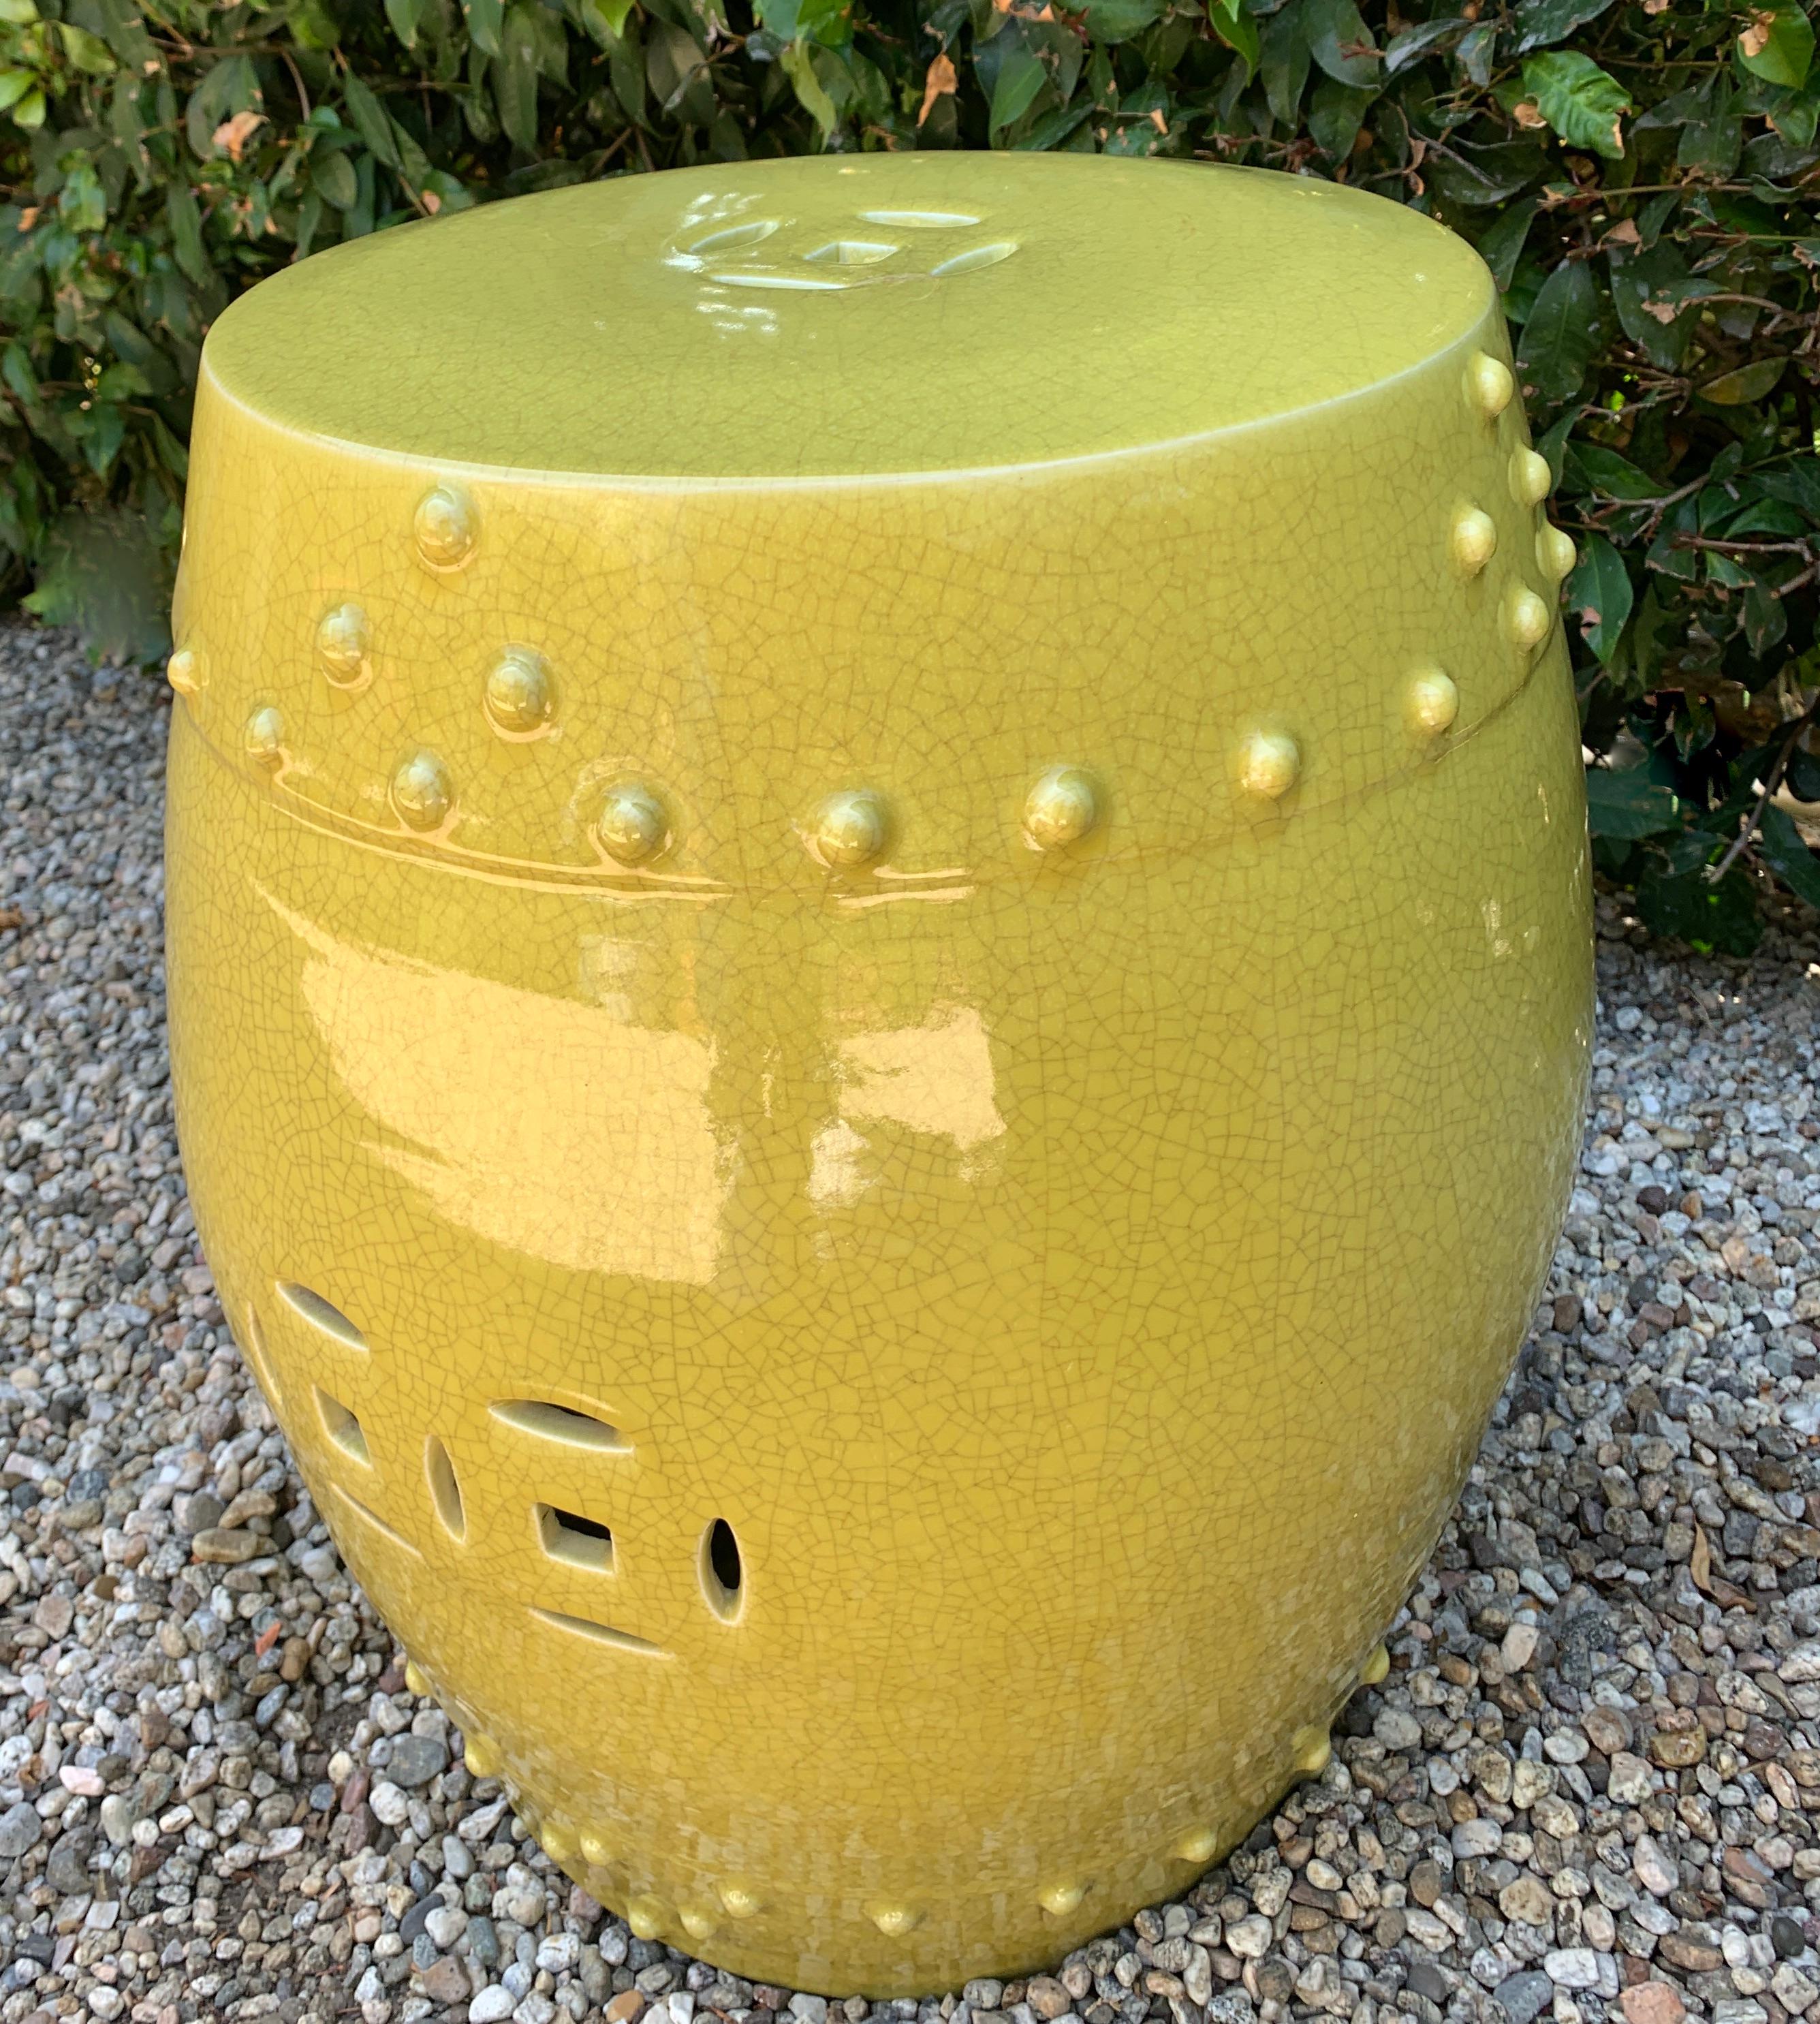 Ceramic Garden stool with Asian motif in a Chartreuse tone. A wonderful stool or side table for the garden or any room in the home.